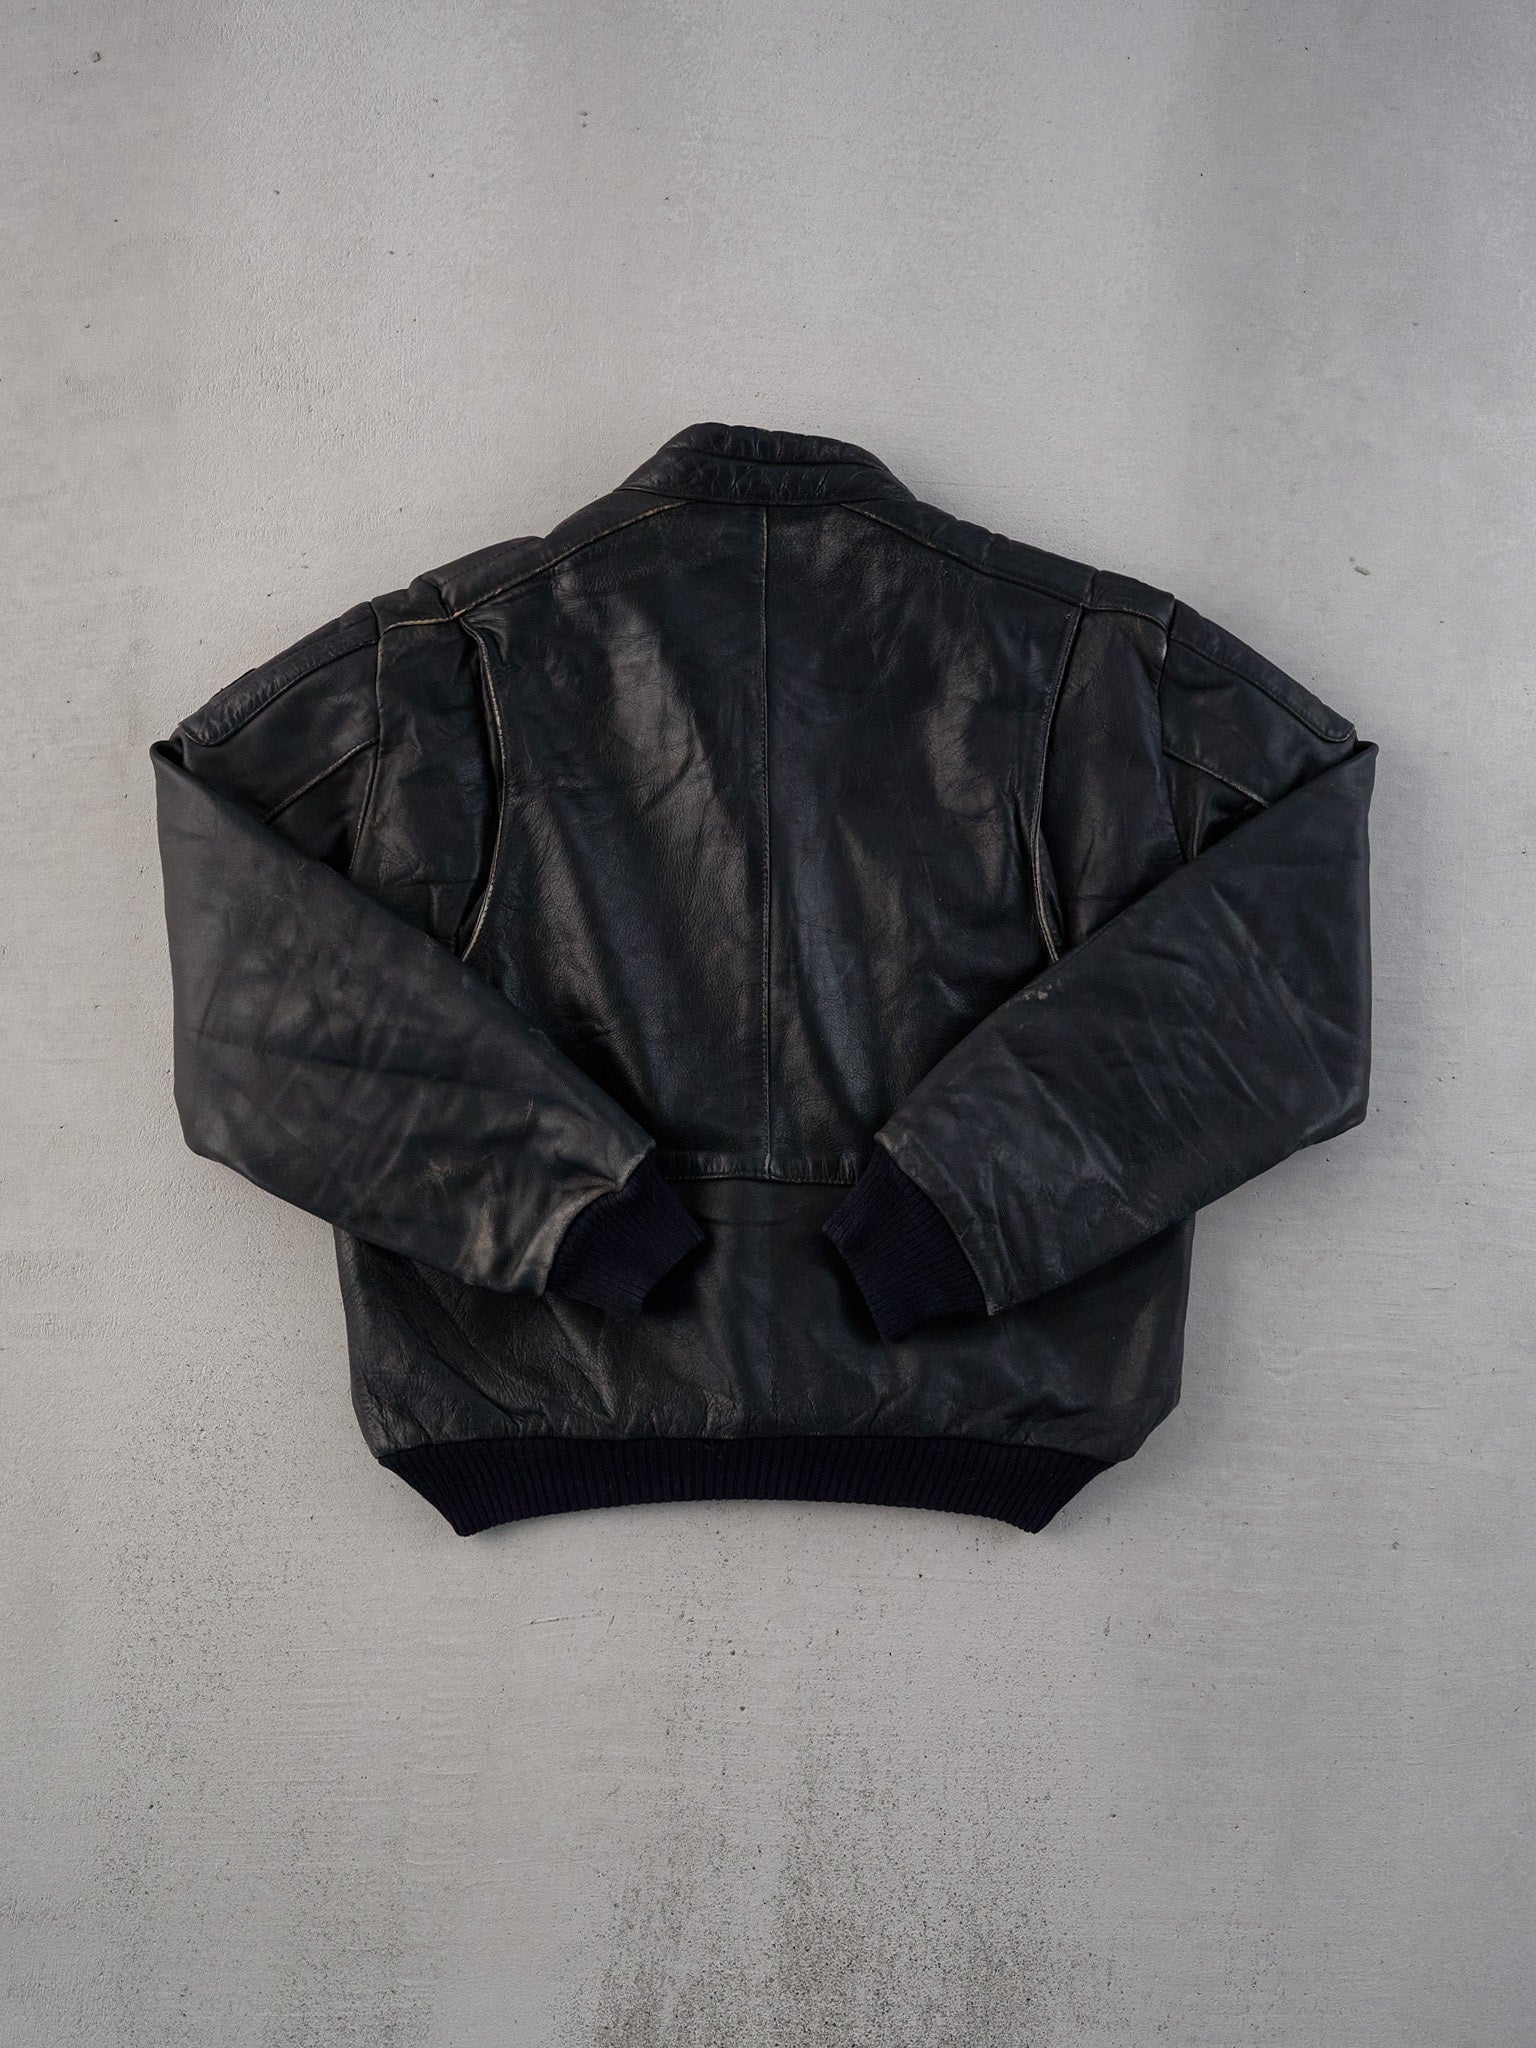 Vintage 90s Black Neilson Rigg Collared Leather Jacket (M)